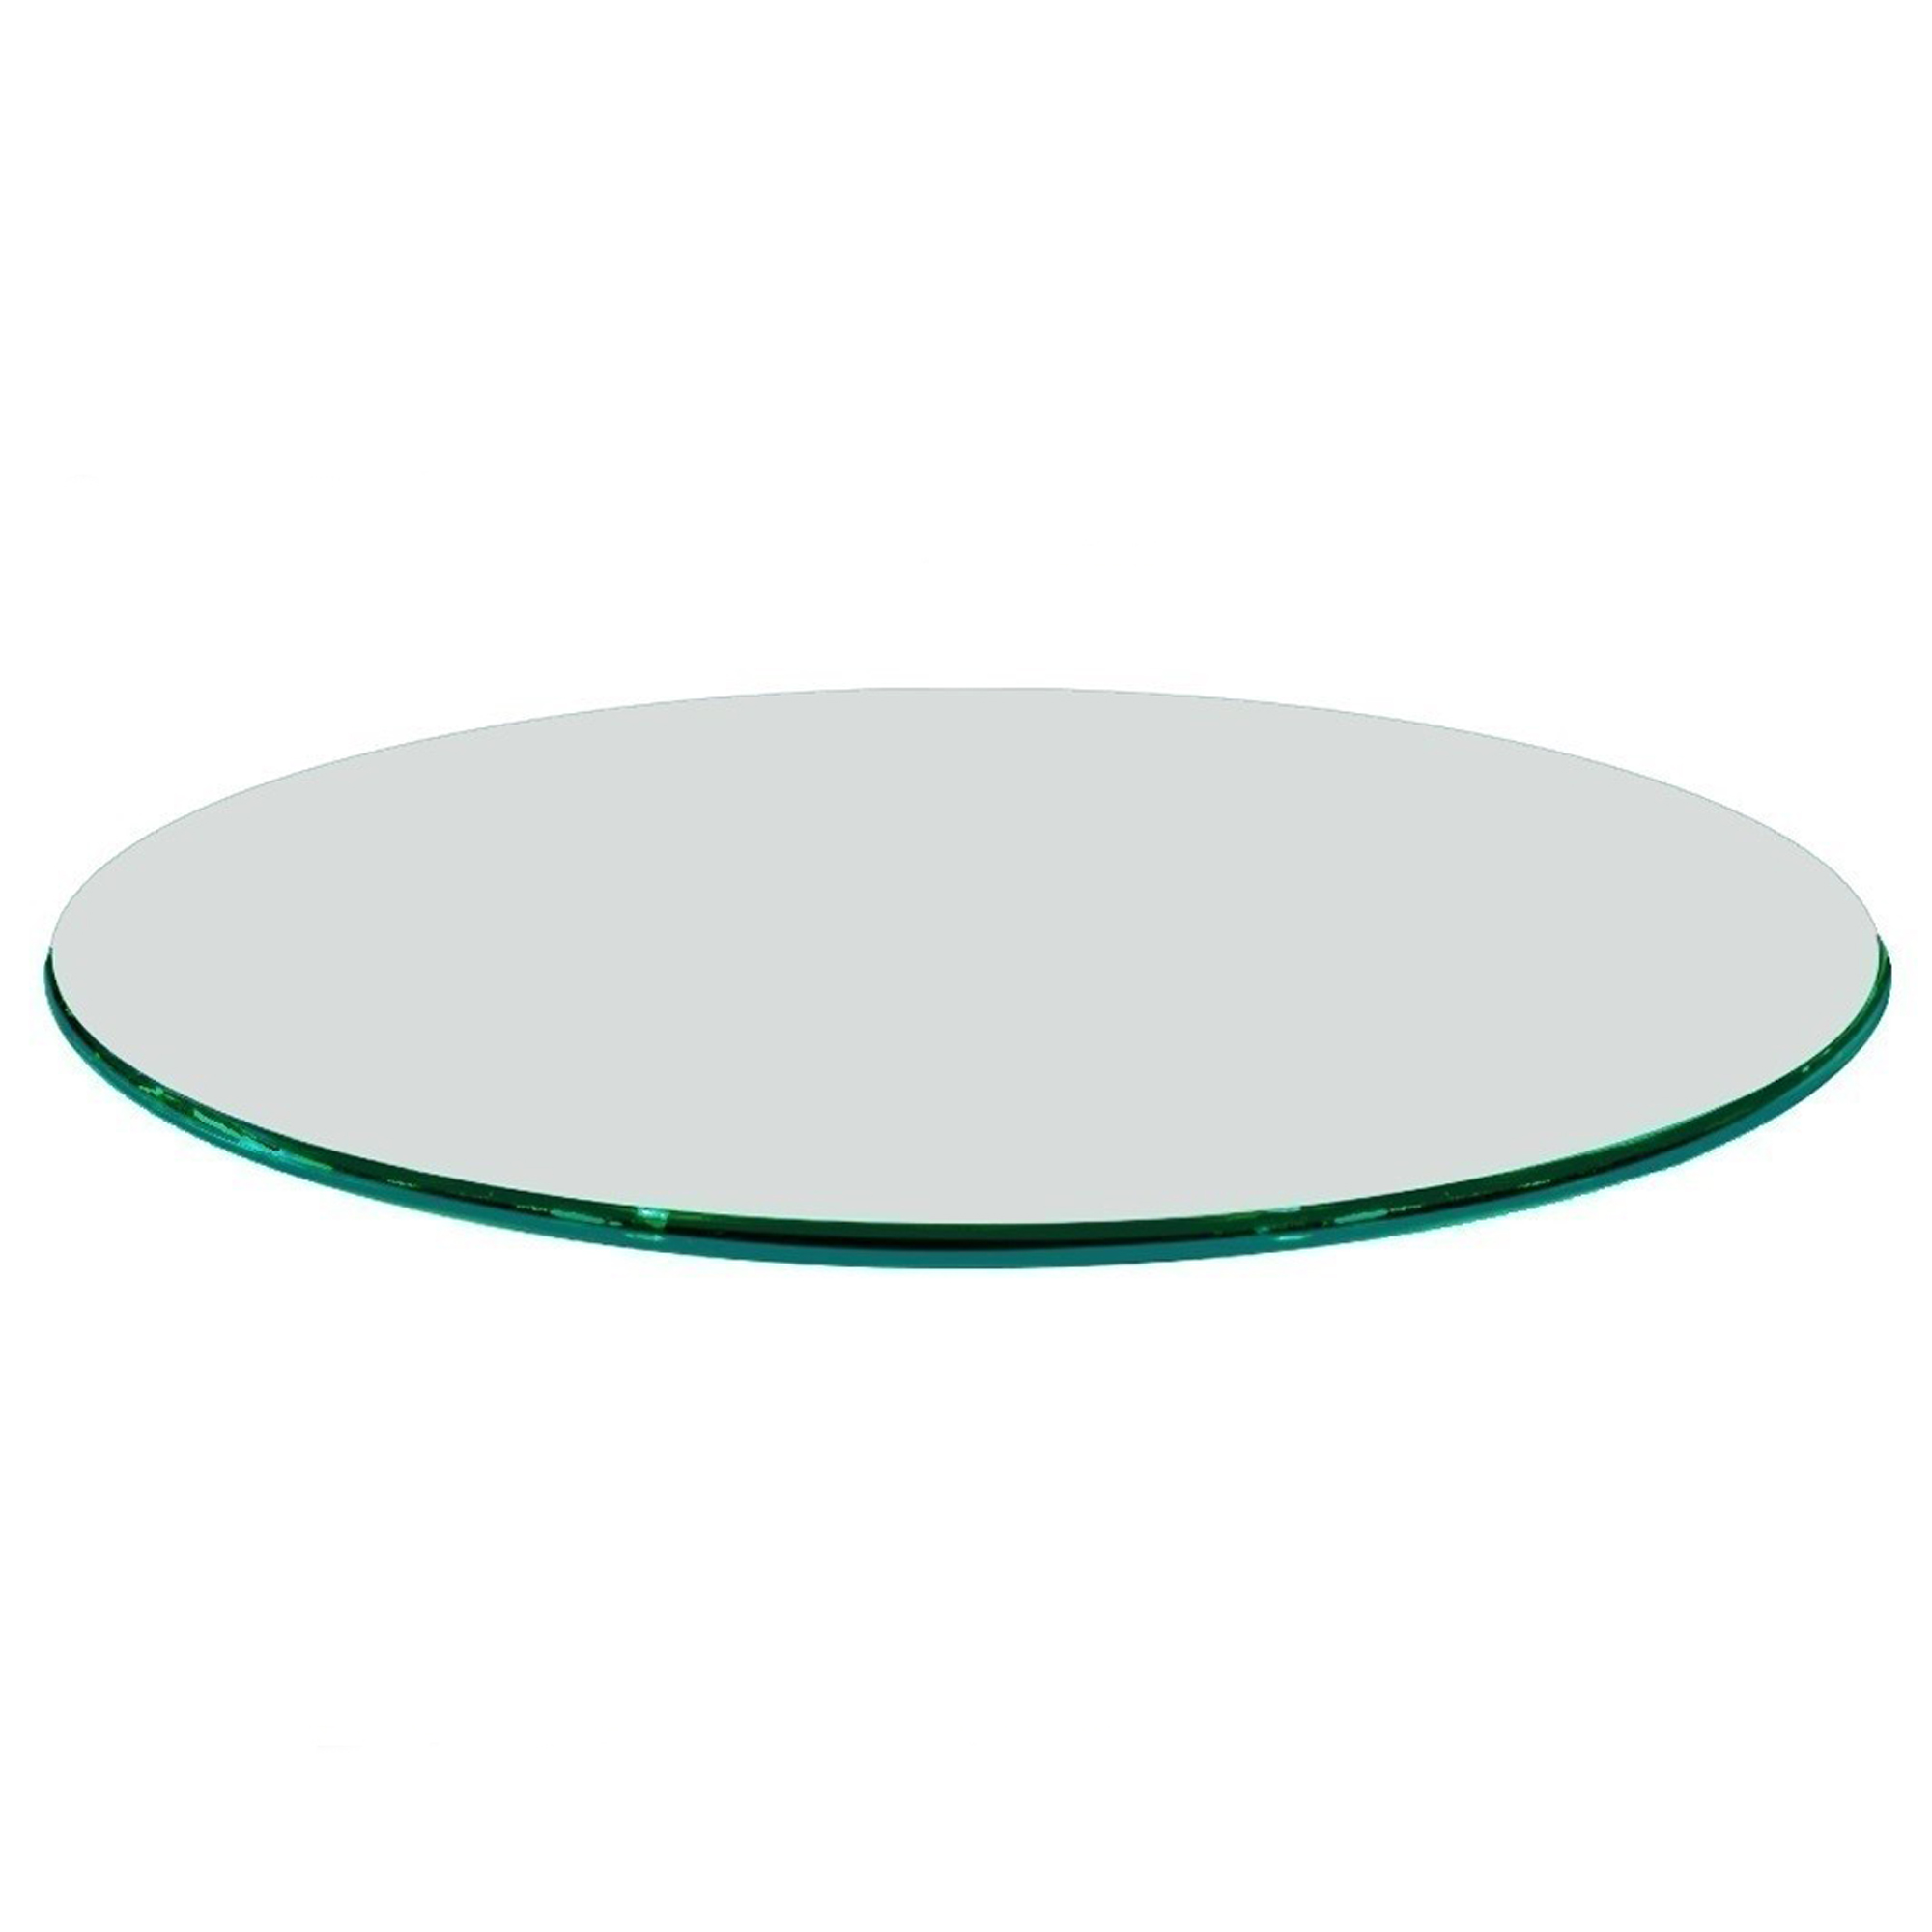 60 Round Glass Table Top 3 4 Thick, 60 Inch Round Table Top Cover